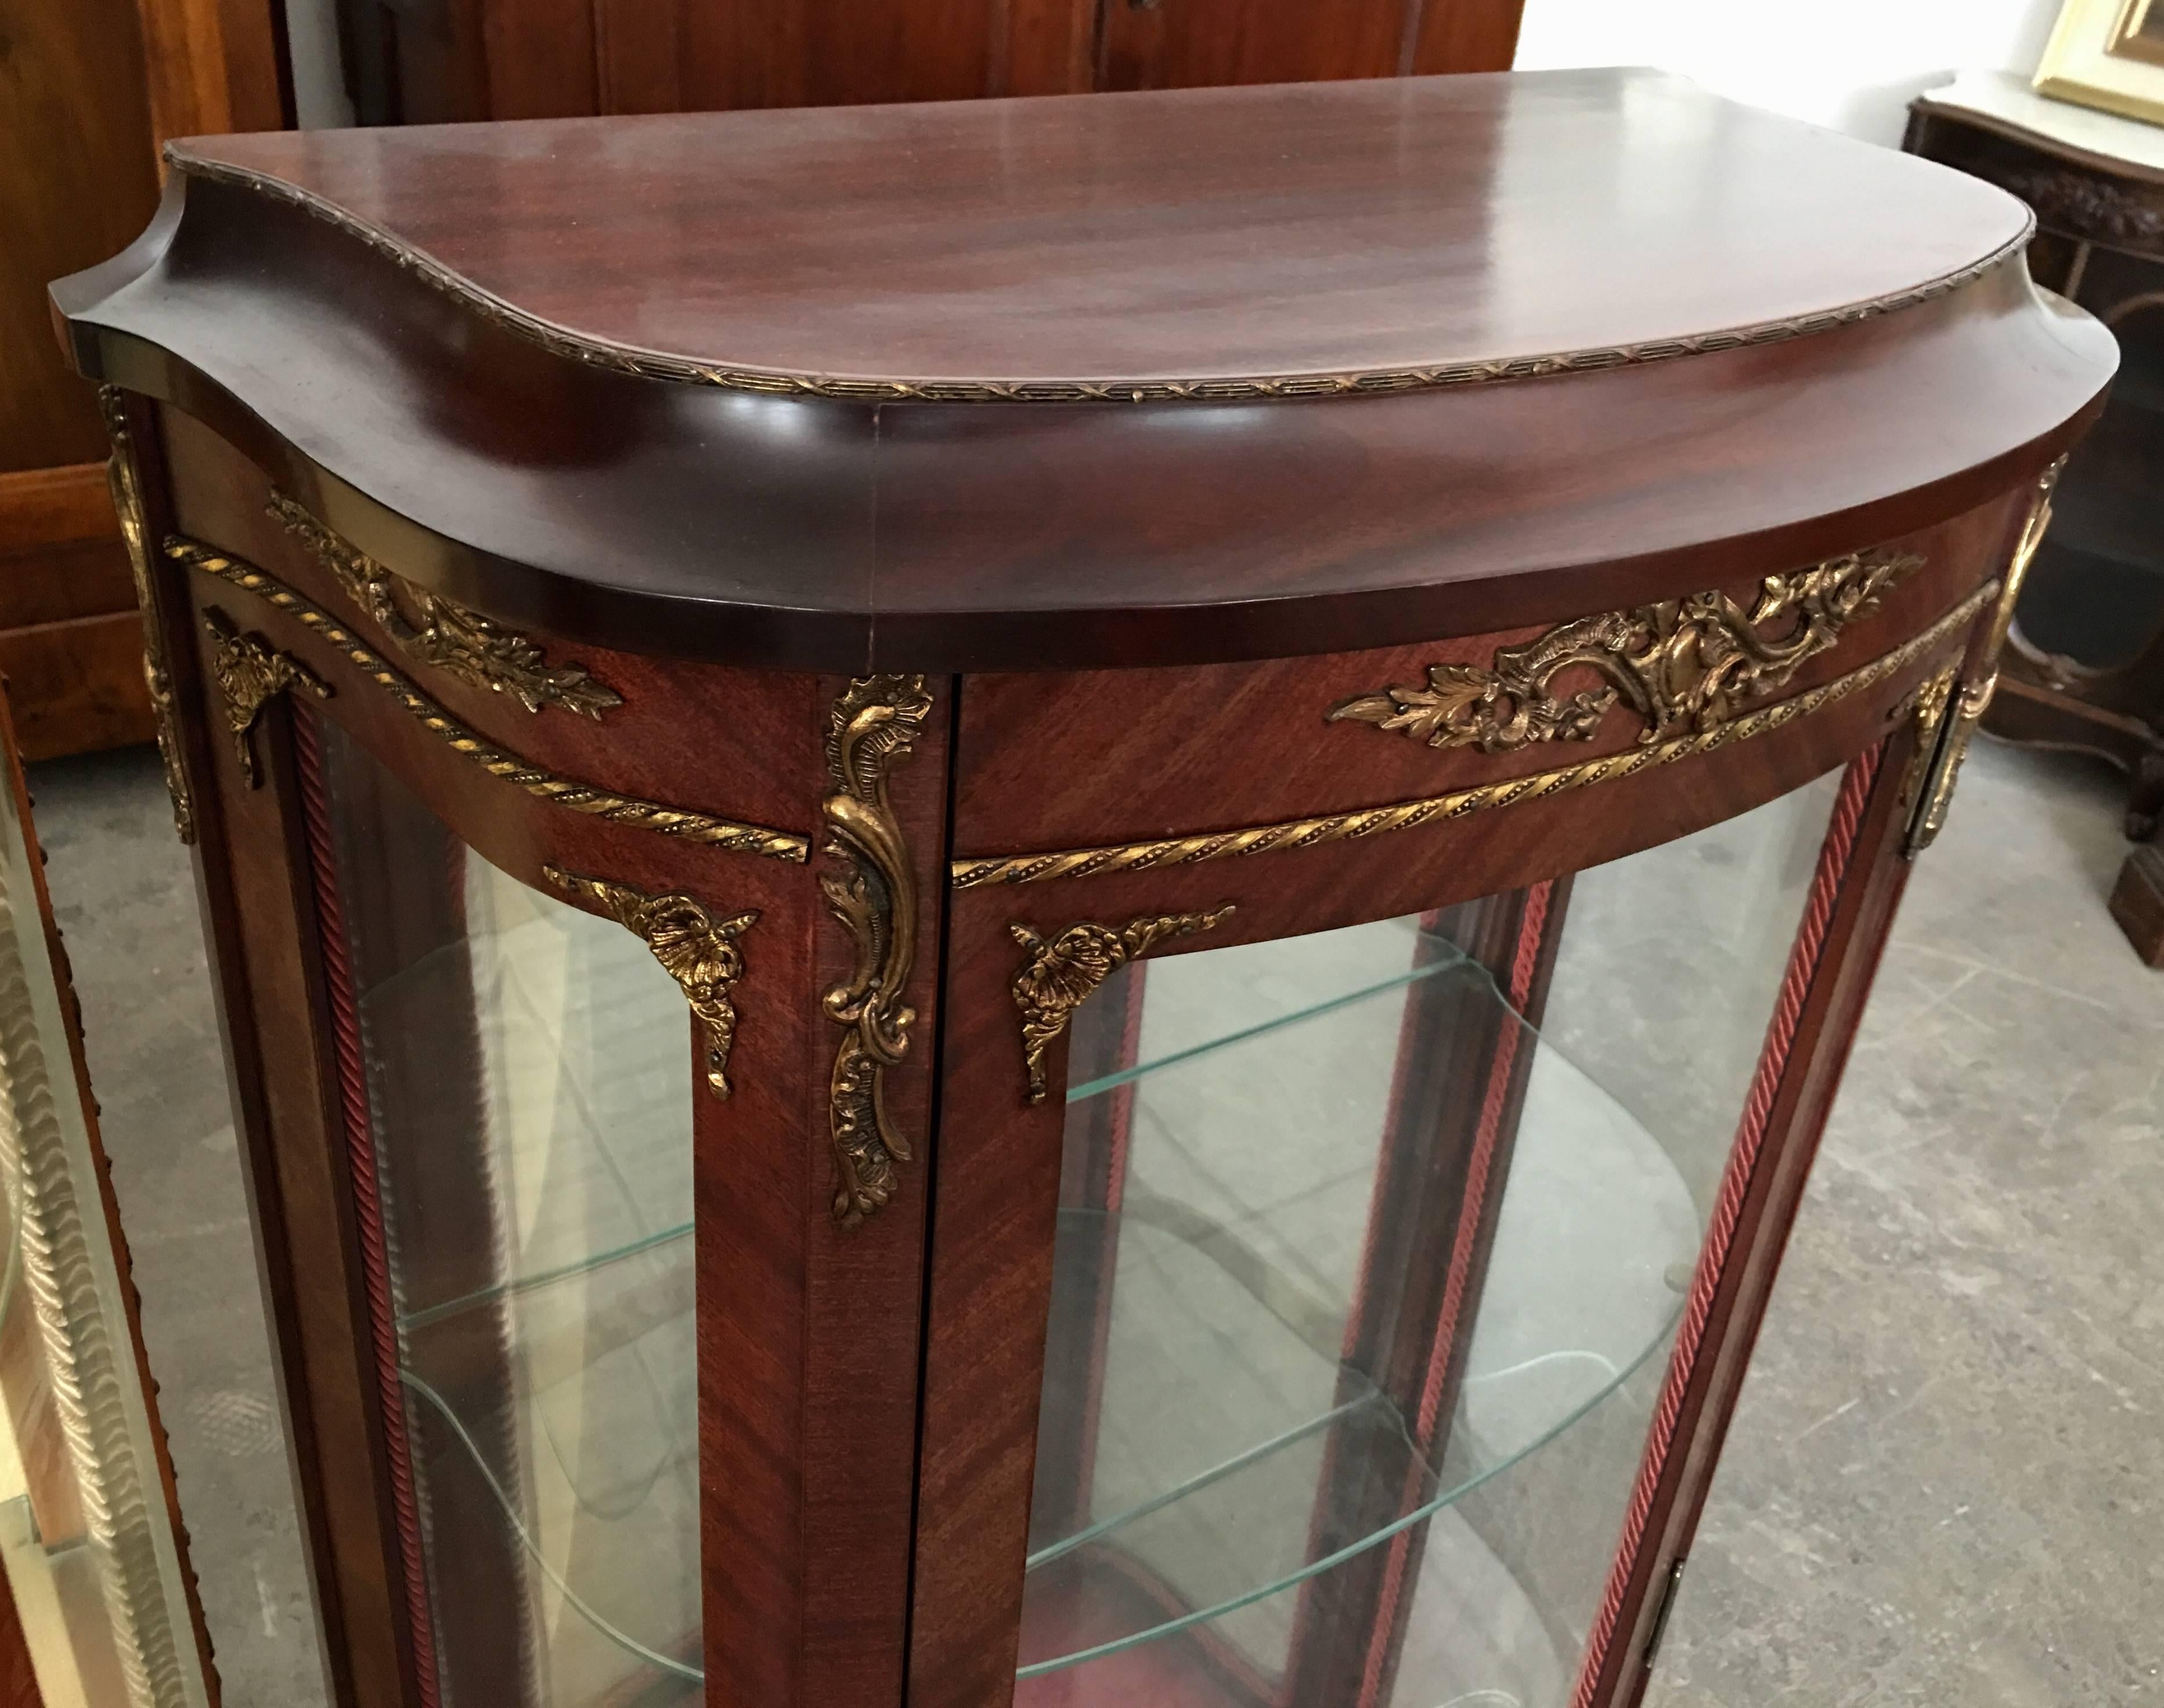 Antique French Louis XVI demilune vitrine
This 1900s antique French Louis XVI-style small demilune vitrine is made of mahogany wood with glass panels. Adorning the facade are brass ormolu accents of leafy and floral motifs and boarder trims with